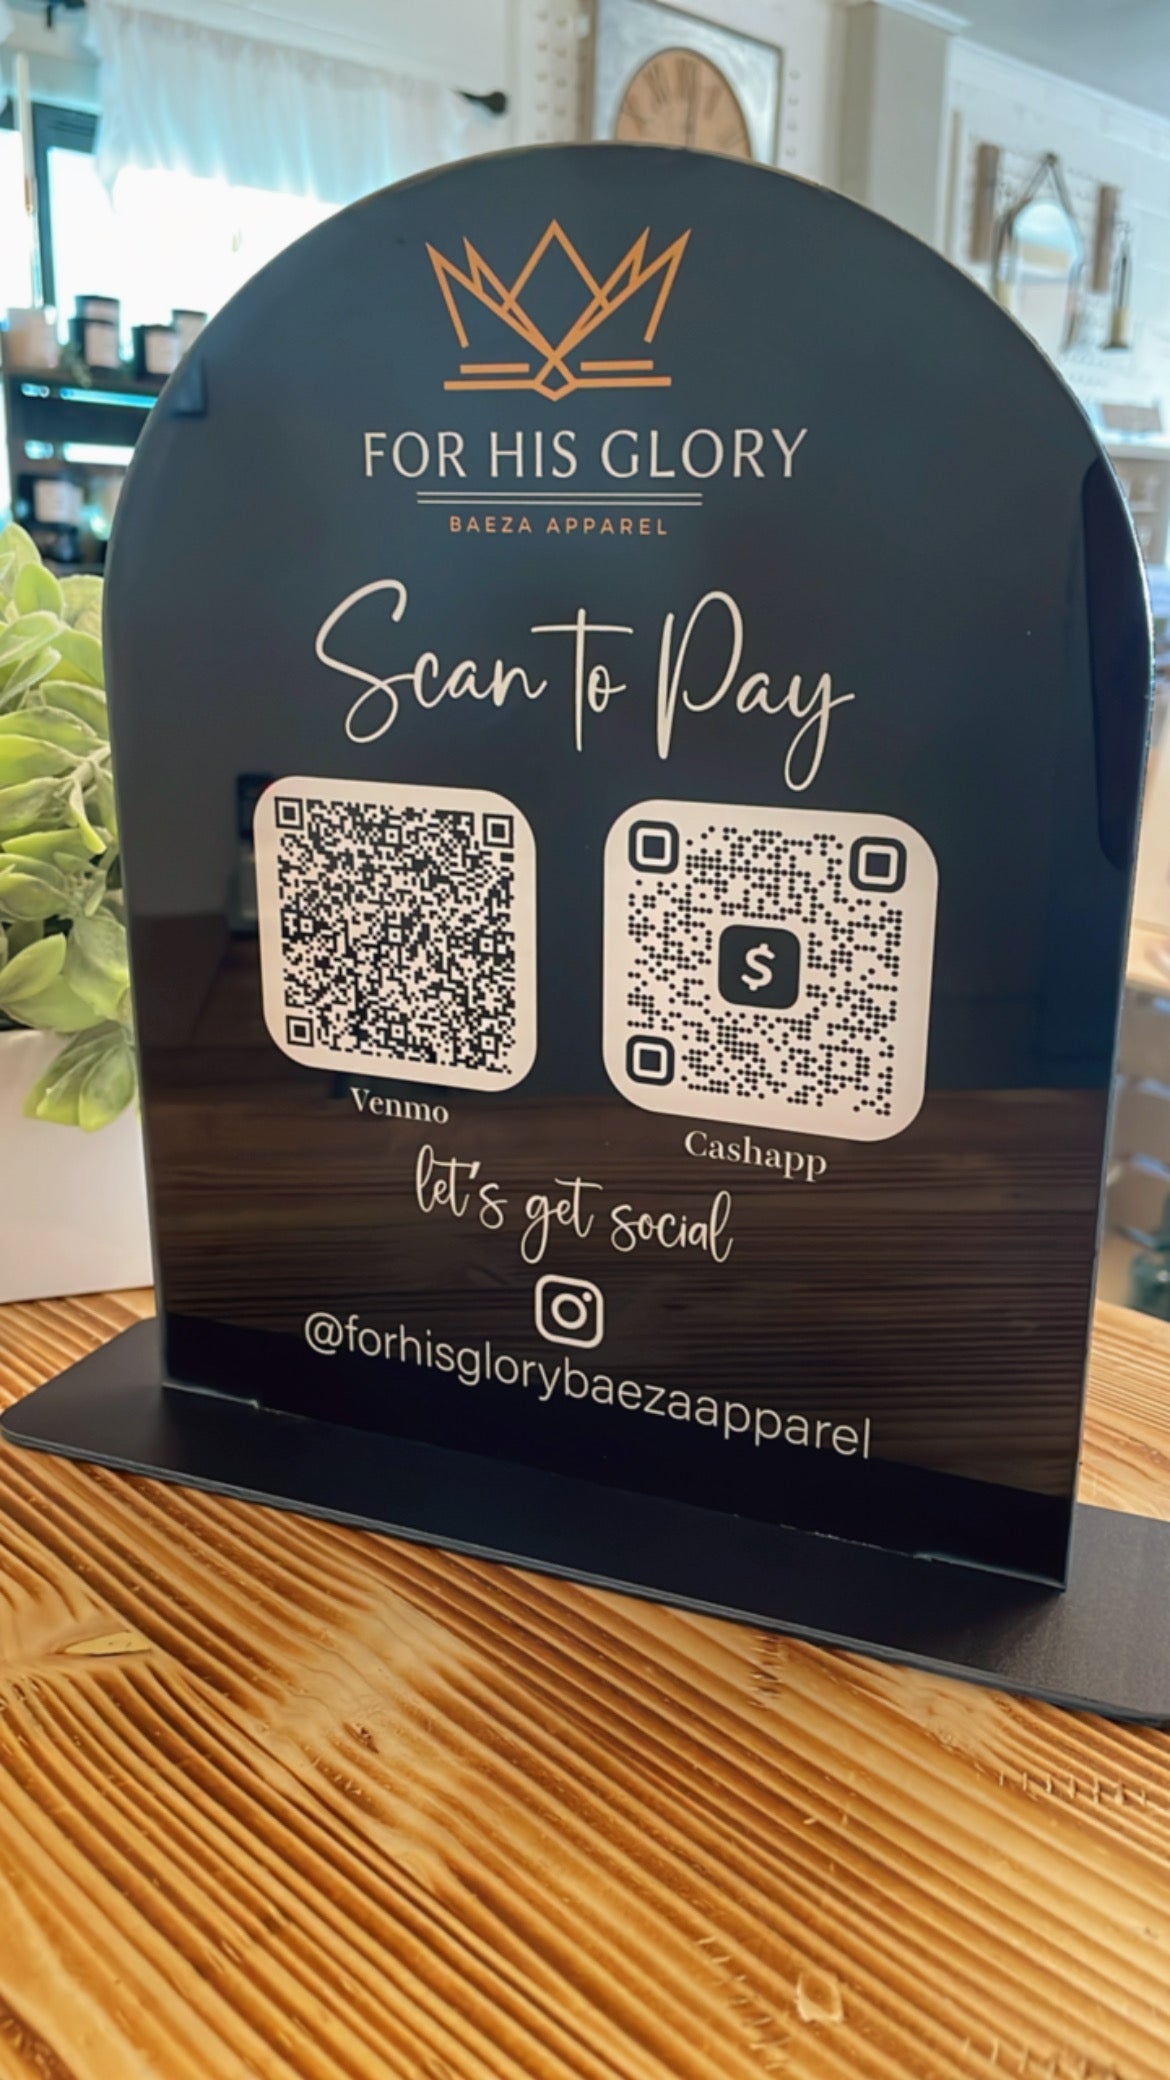 Acrylic |Acrylic Scannable QR code | Scan to pay | Connect with me